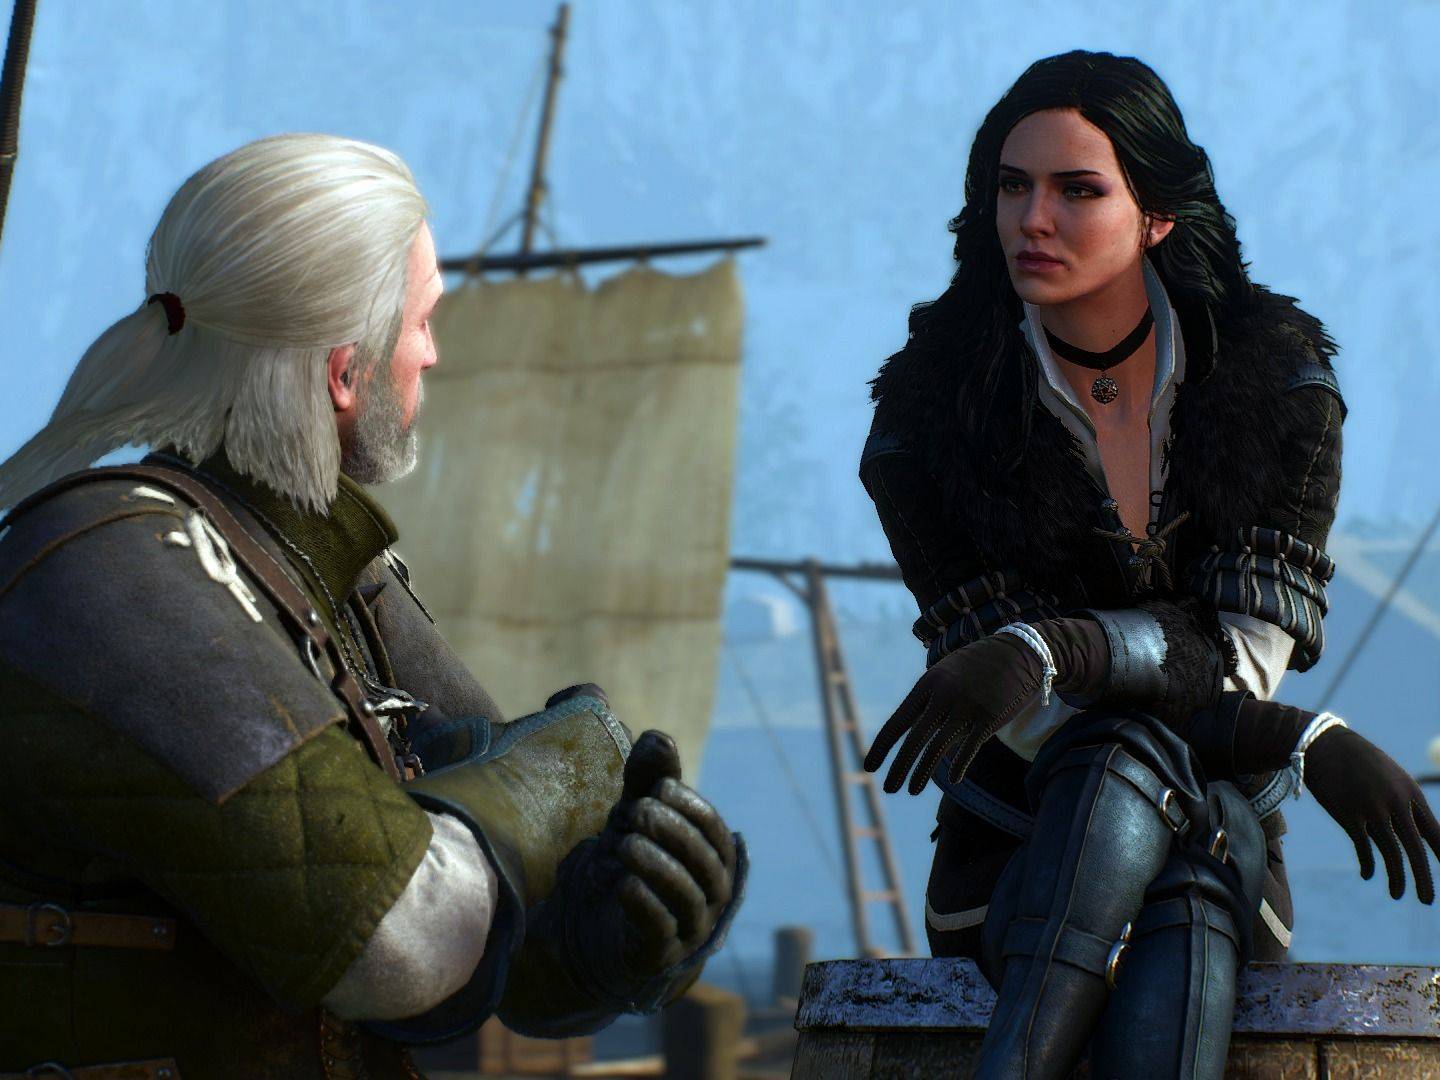 The Localization of the Witcher – accents and cultural connections